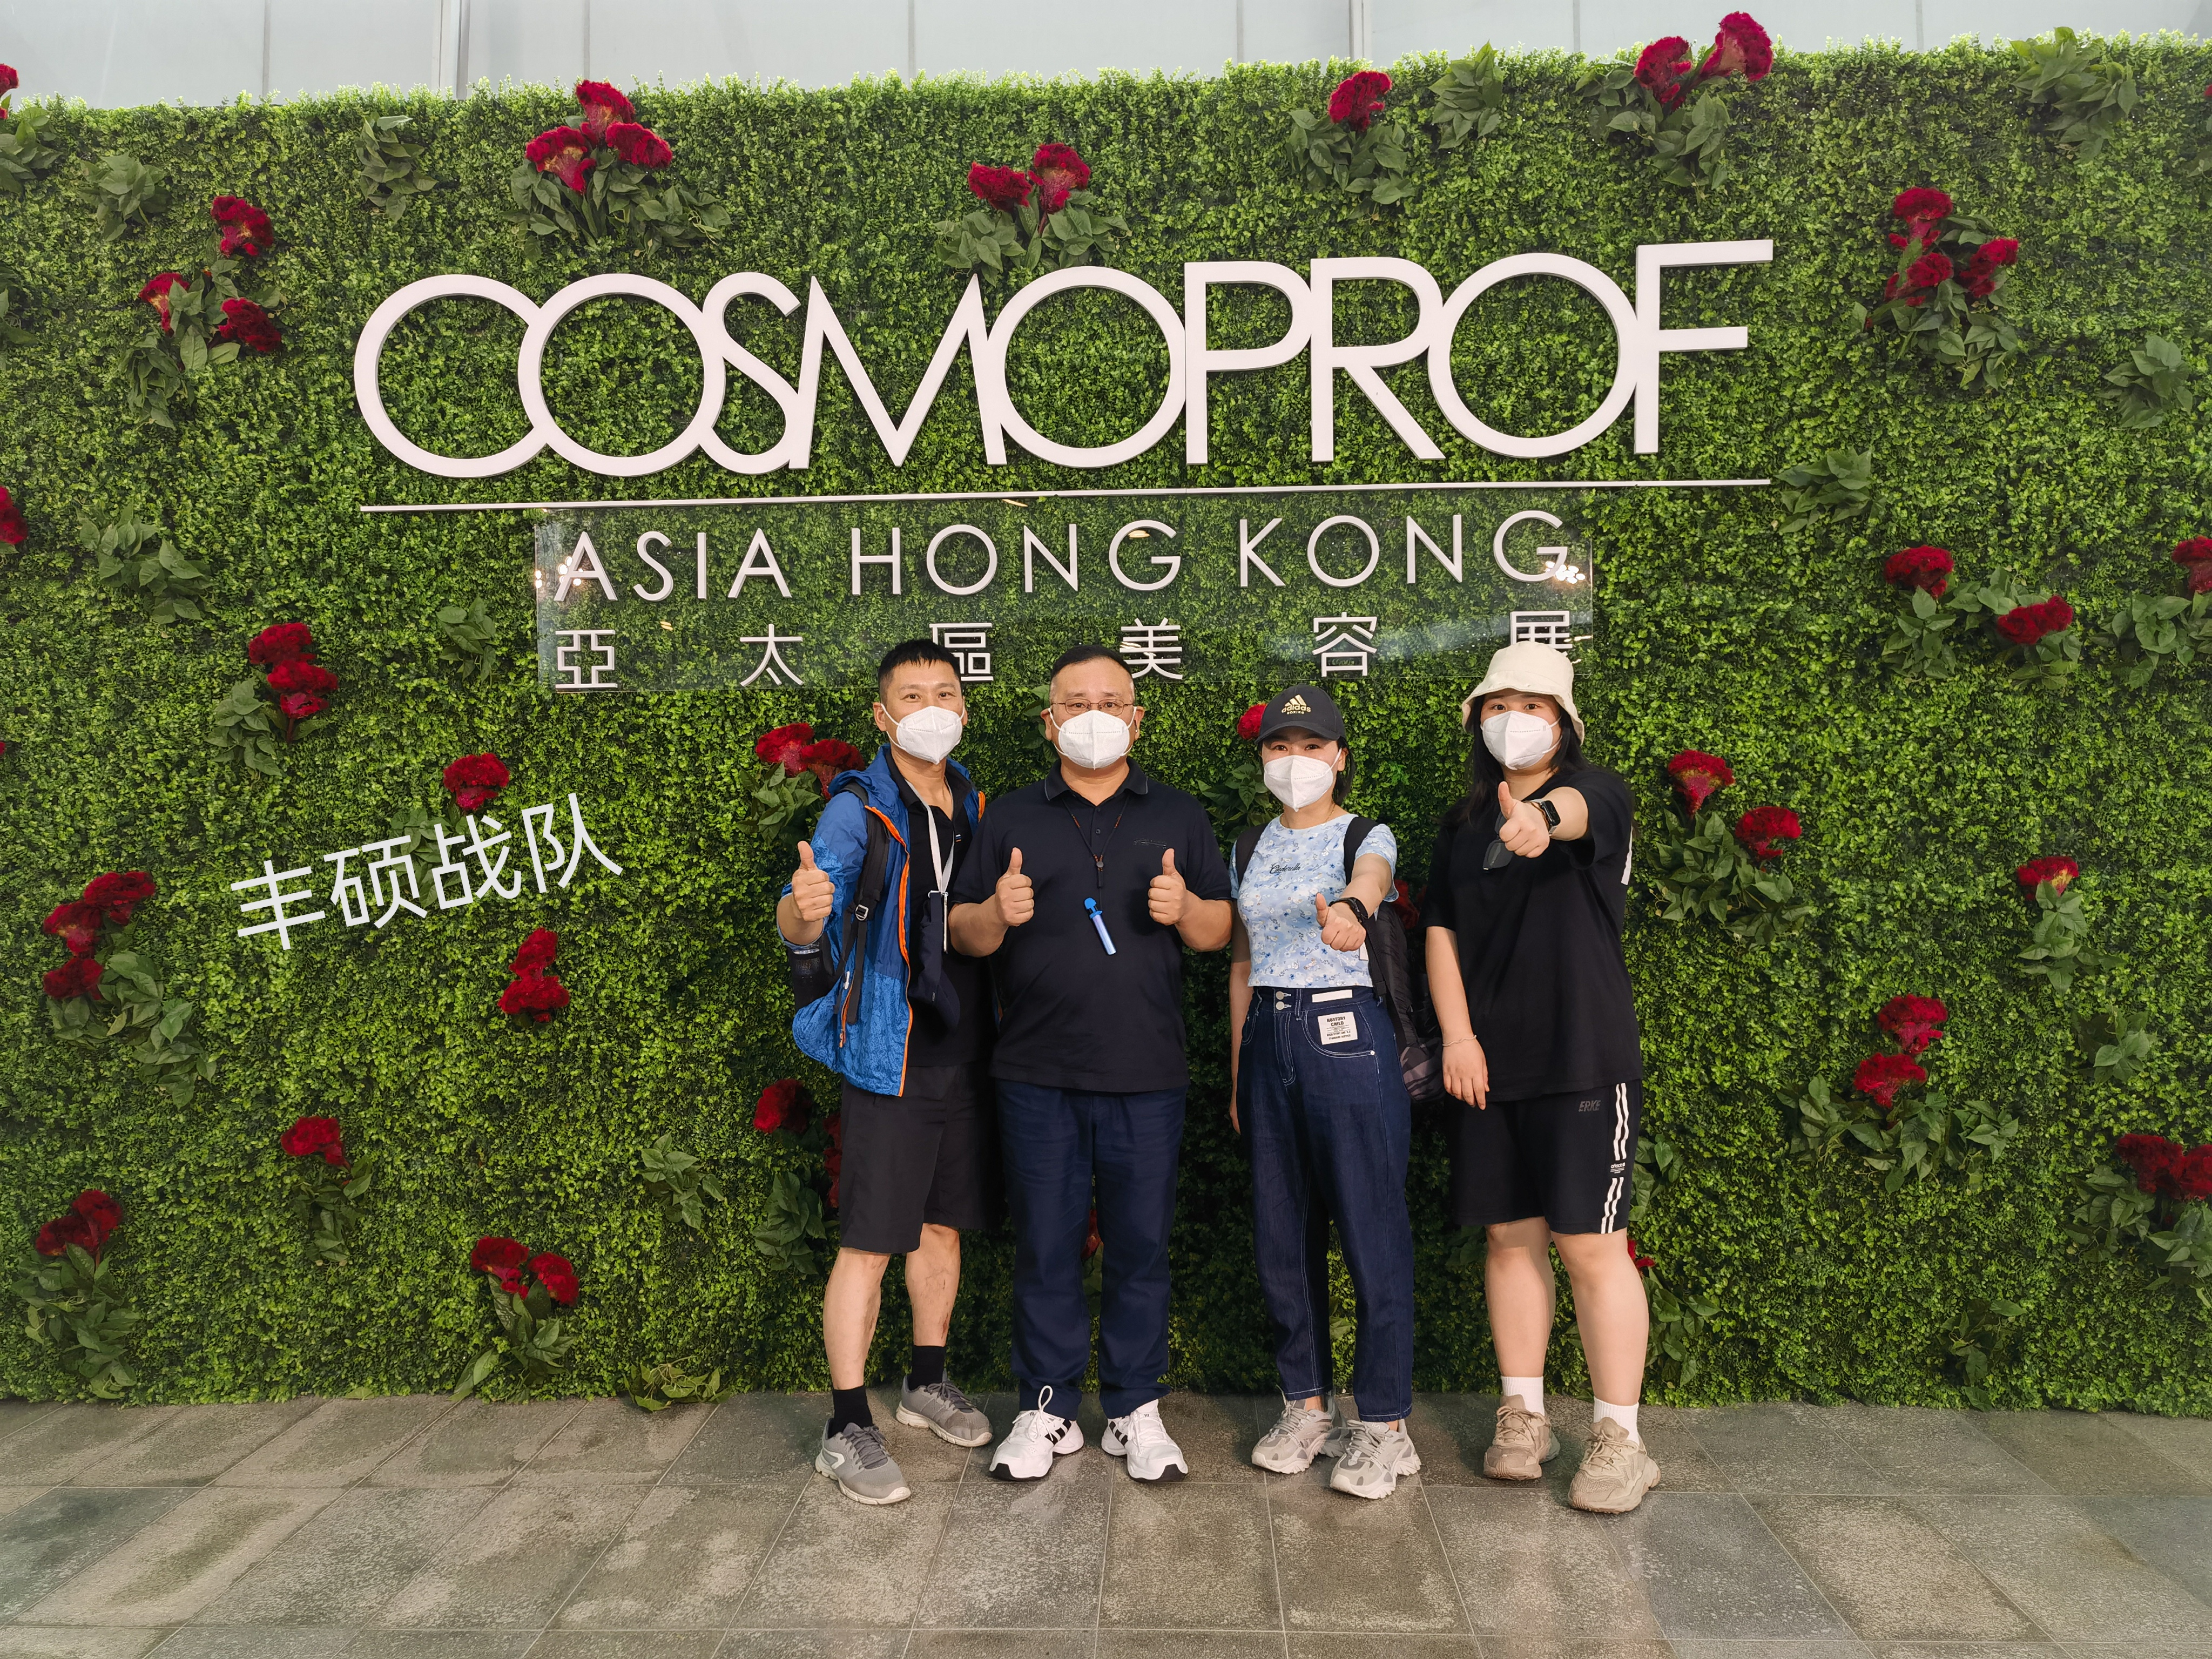 Over 20,000 international beauty stakeholders made Cosmoprof Asia 2022 in Singapore a resounding success, empowering the industry ahead of next year’s return to Hong Kong